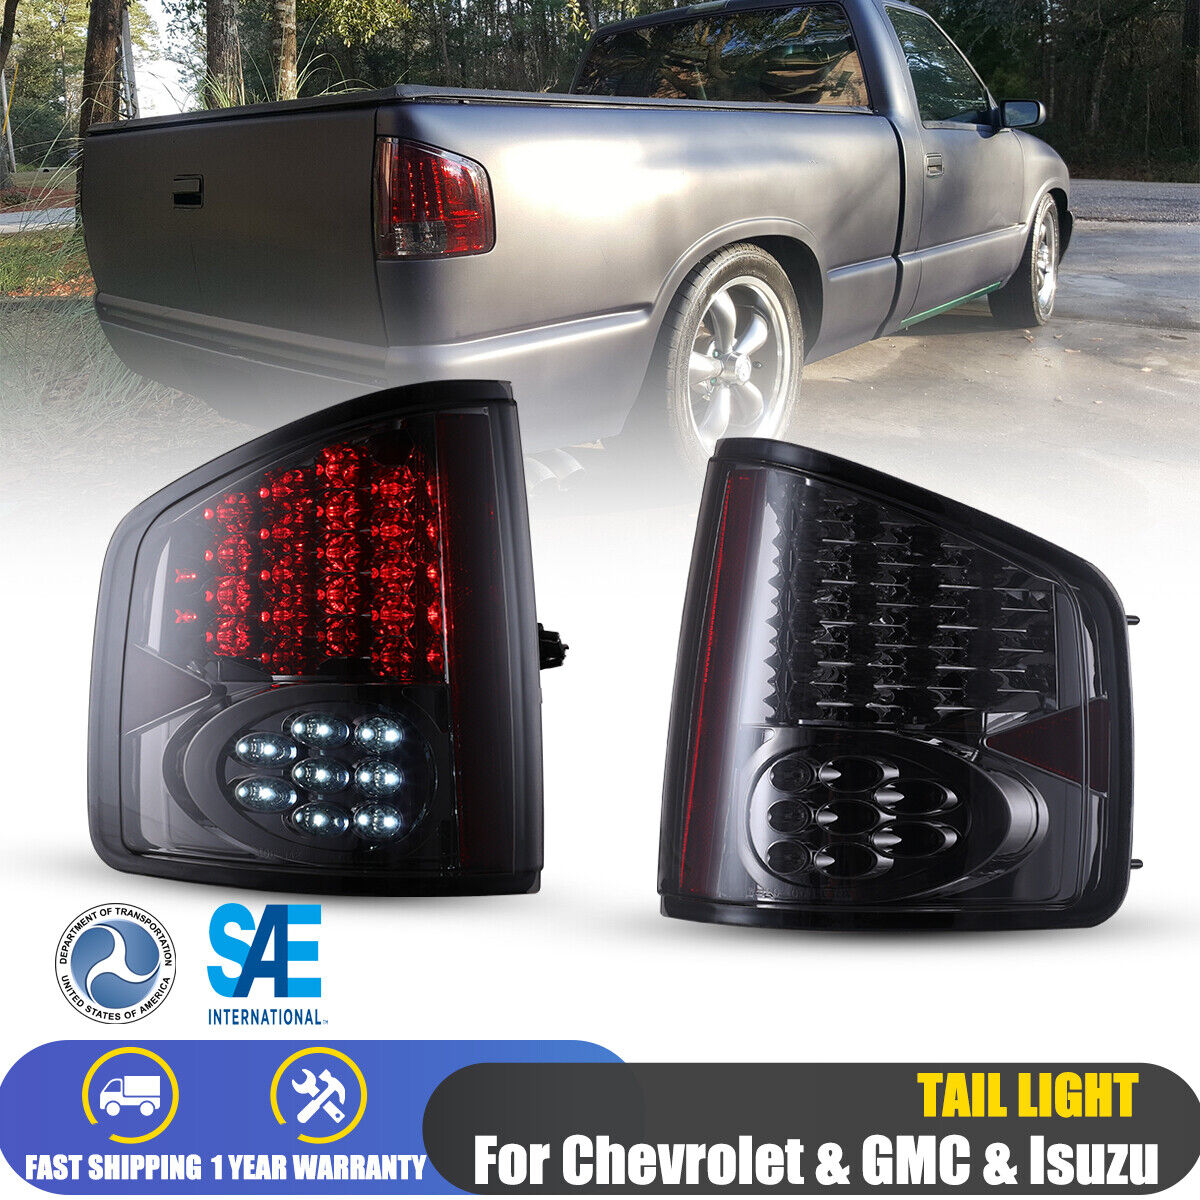 LED Tail Lights for 1994-2004 Chevy S10/GMC Sonoma Isuzu Black Smoke Rear Lamps